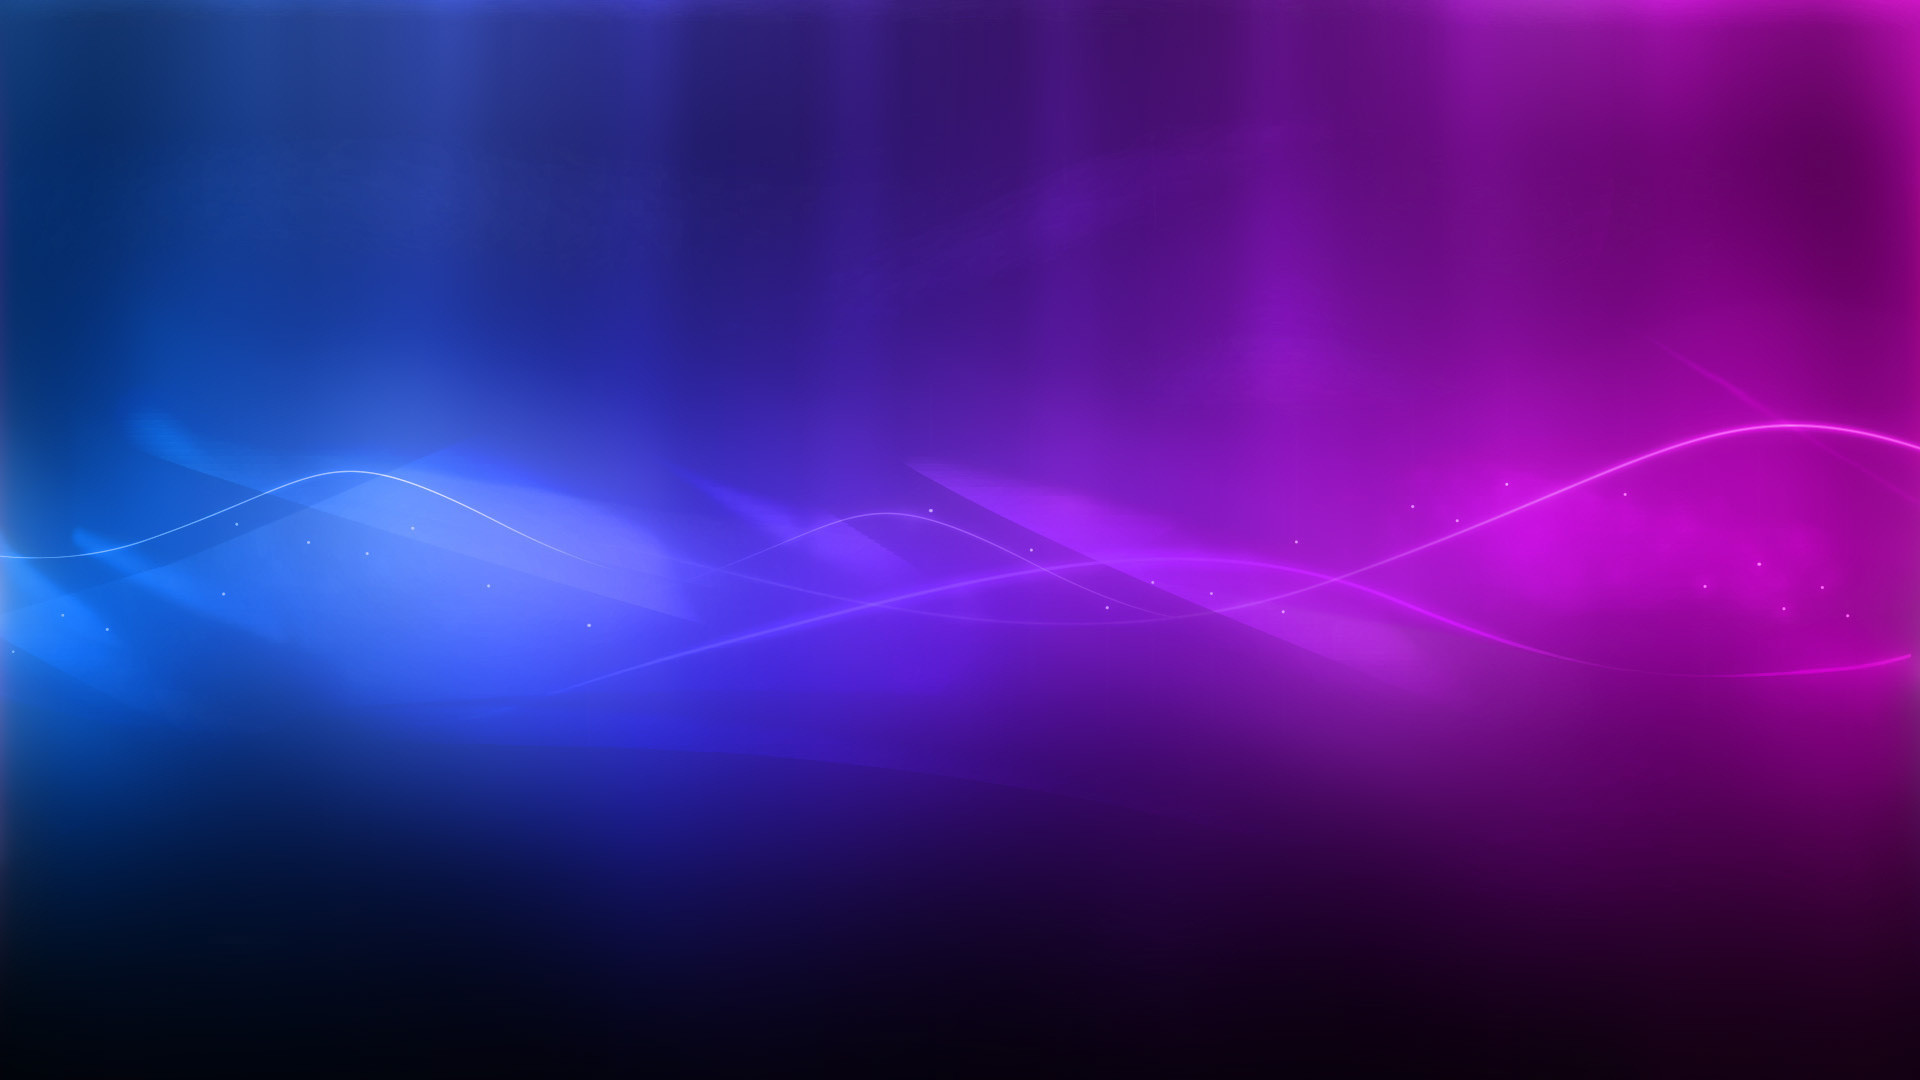 1920x1080 Blue Pink HD Wallpapers | Backgrounds - Wallpaper Abyss